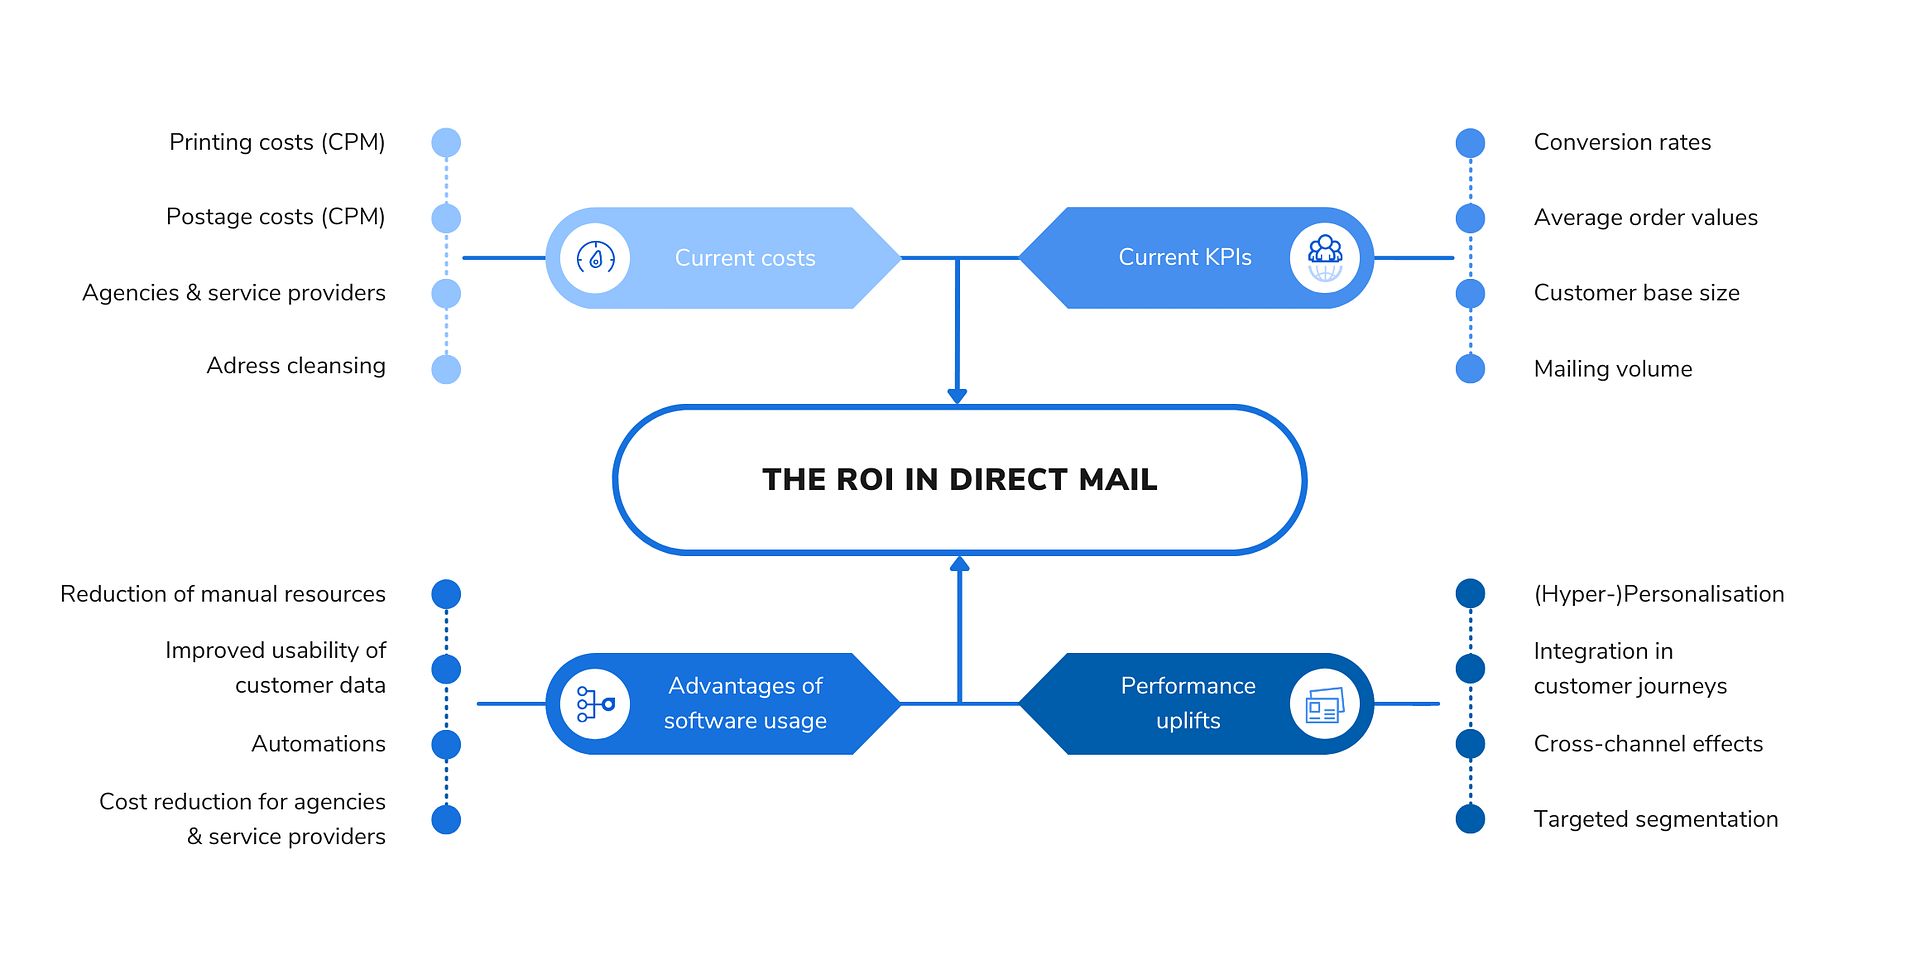 Sales increase over cost efficiency: The ROI in direct mail